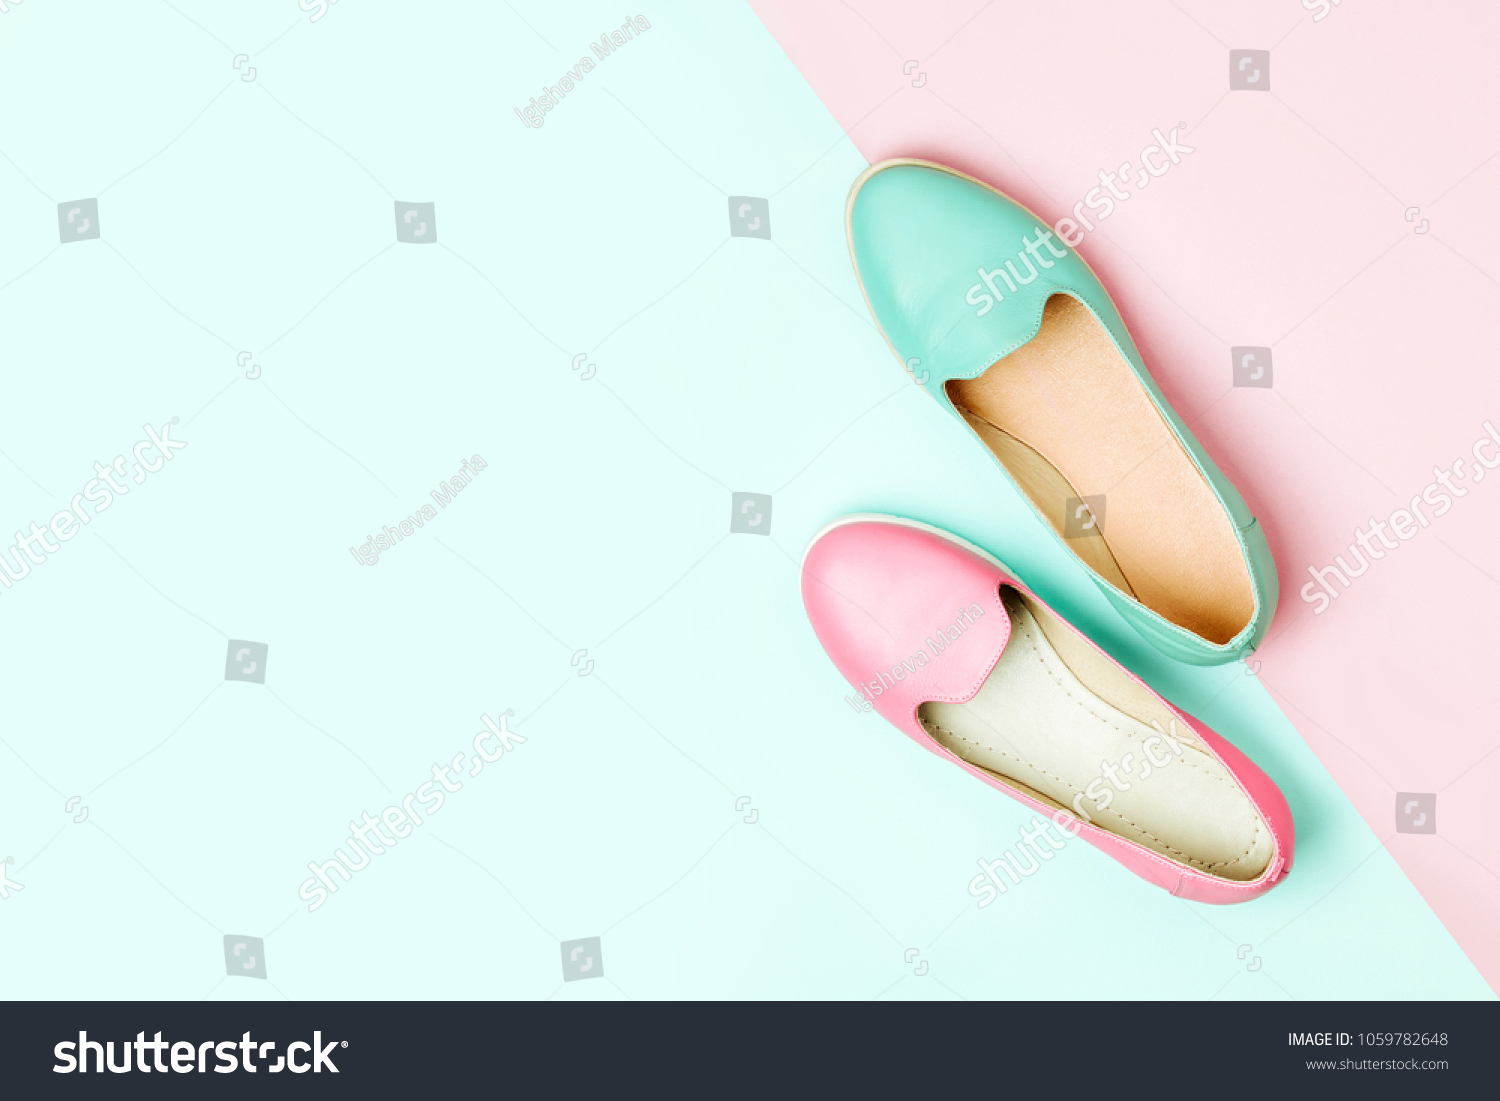 Stylish female shoes in pastel colors. Beauty and fashion concept. Flat lay, top view #1059782648